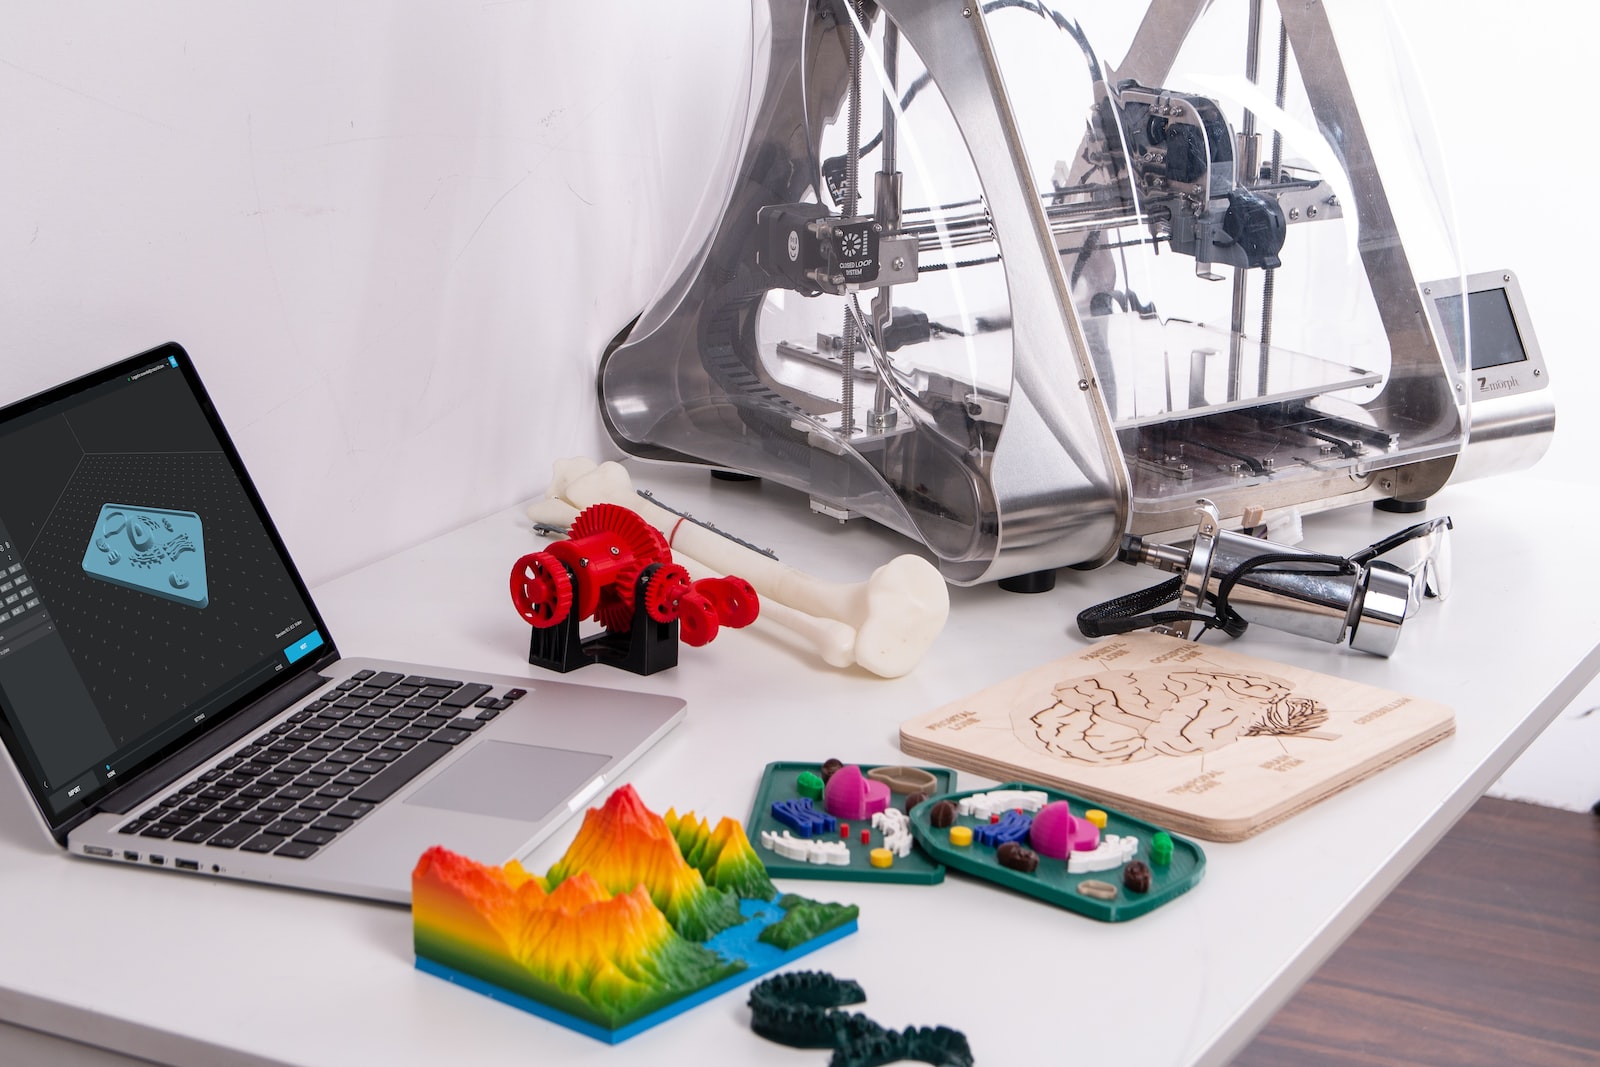  3D Printing Services in Los Angeles